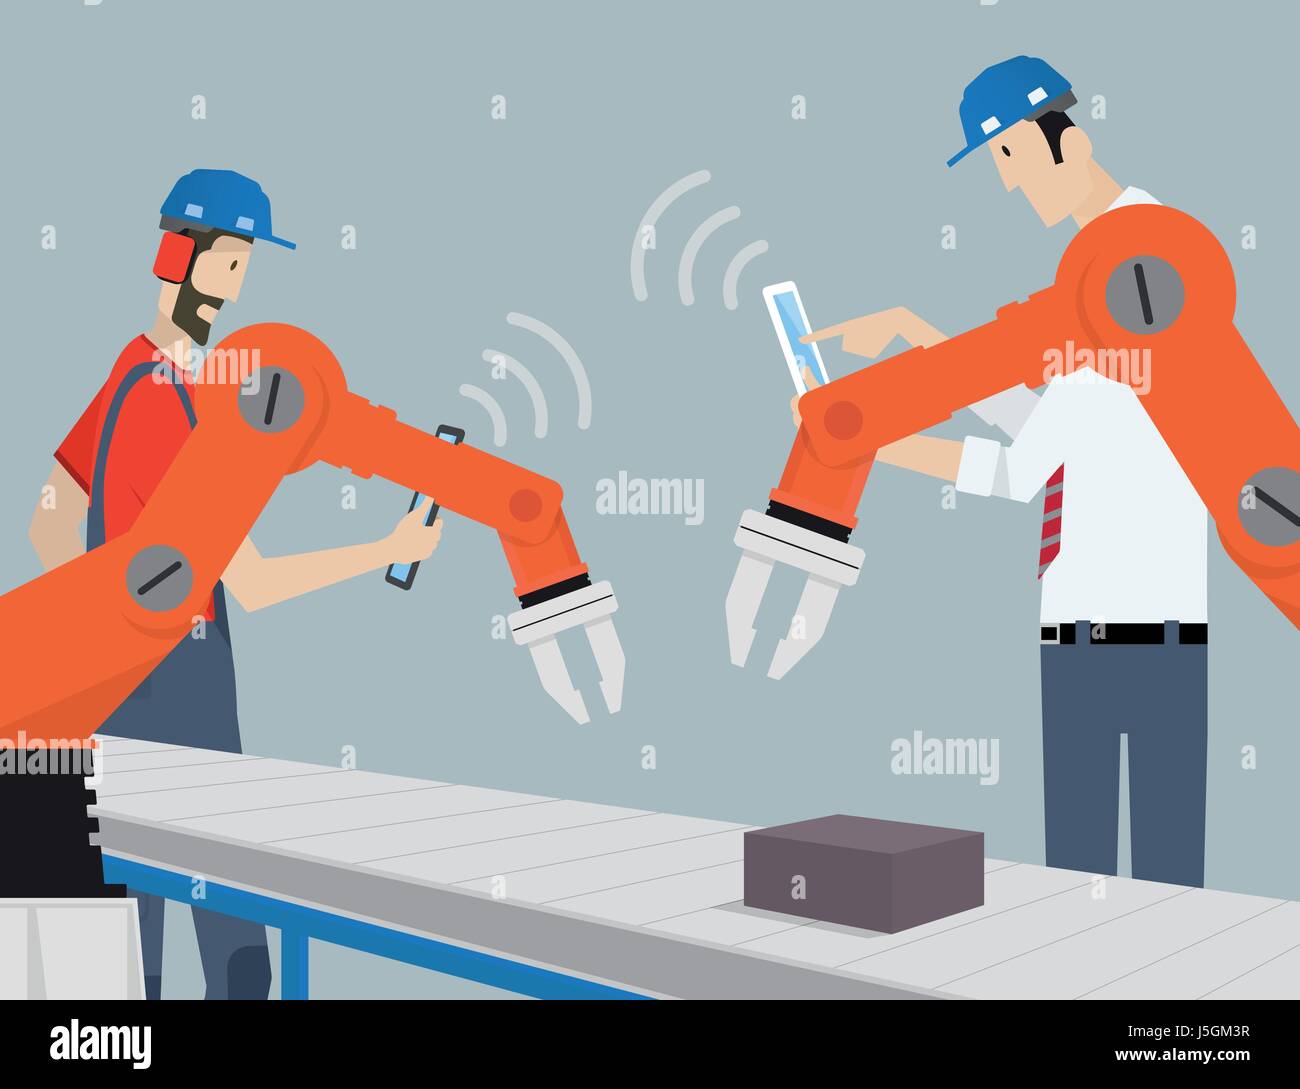 Industry 4.0 Factory Automation Concept. Robot hands controlled by tablet PC. Stock Vector